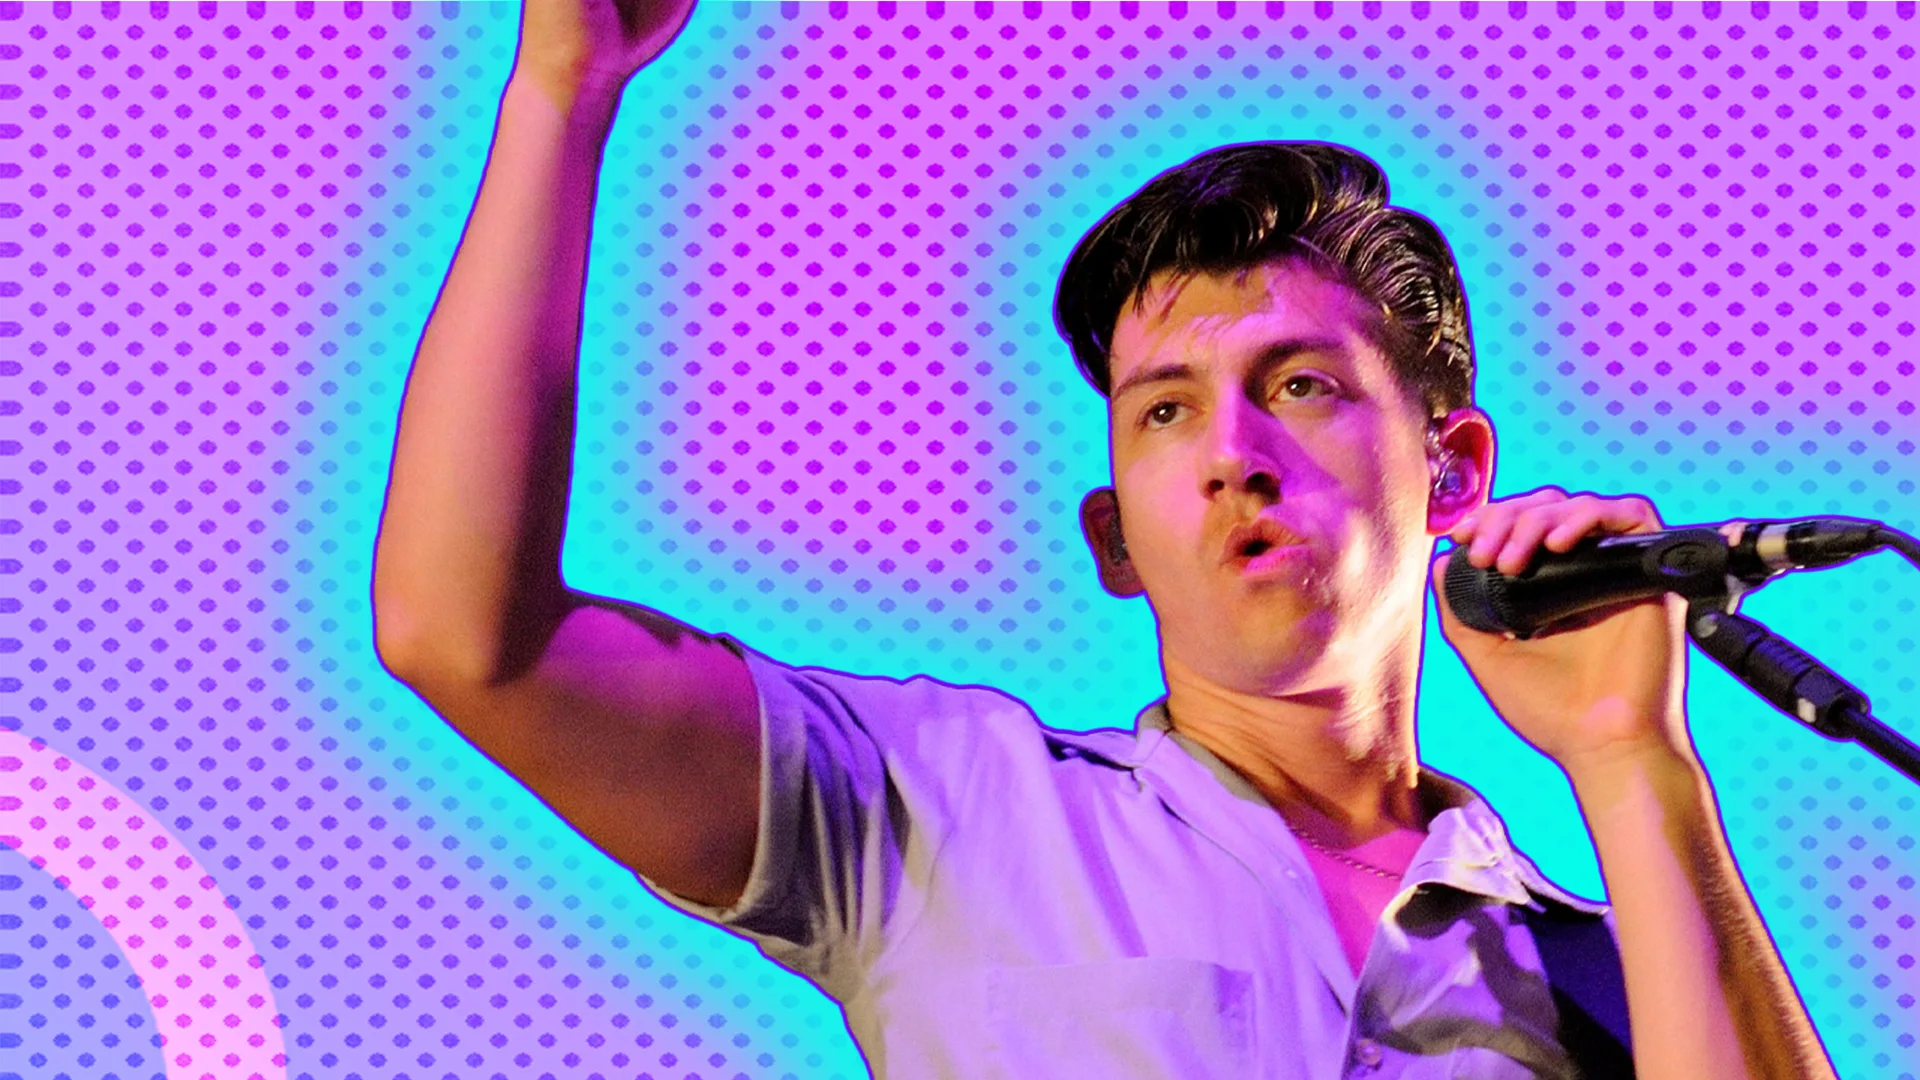 Alex Turner singing with one arm raised, outlined with blue halo effect on purple-dotted background.